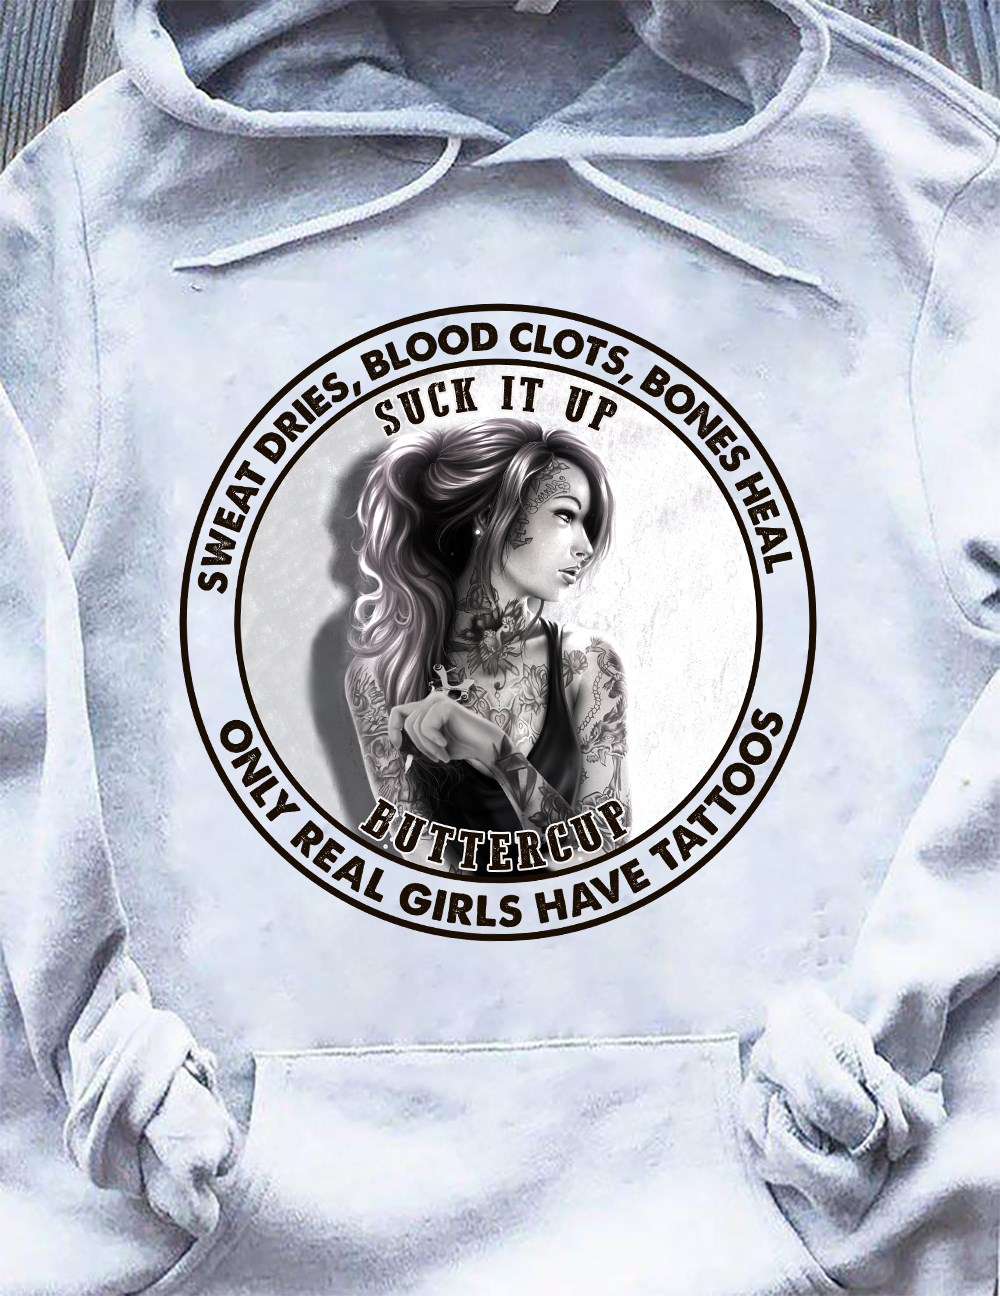 Sweat dries, blood clots, bones heal only real girls have tattoos- Suck it up Buttercup